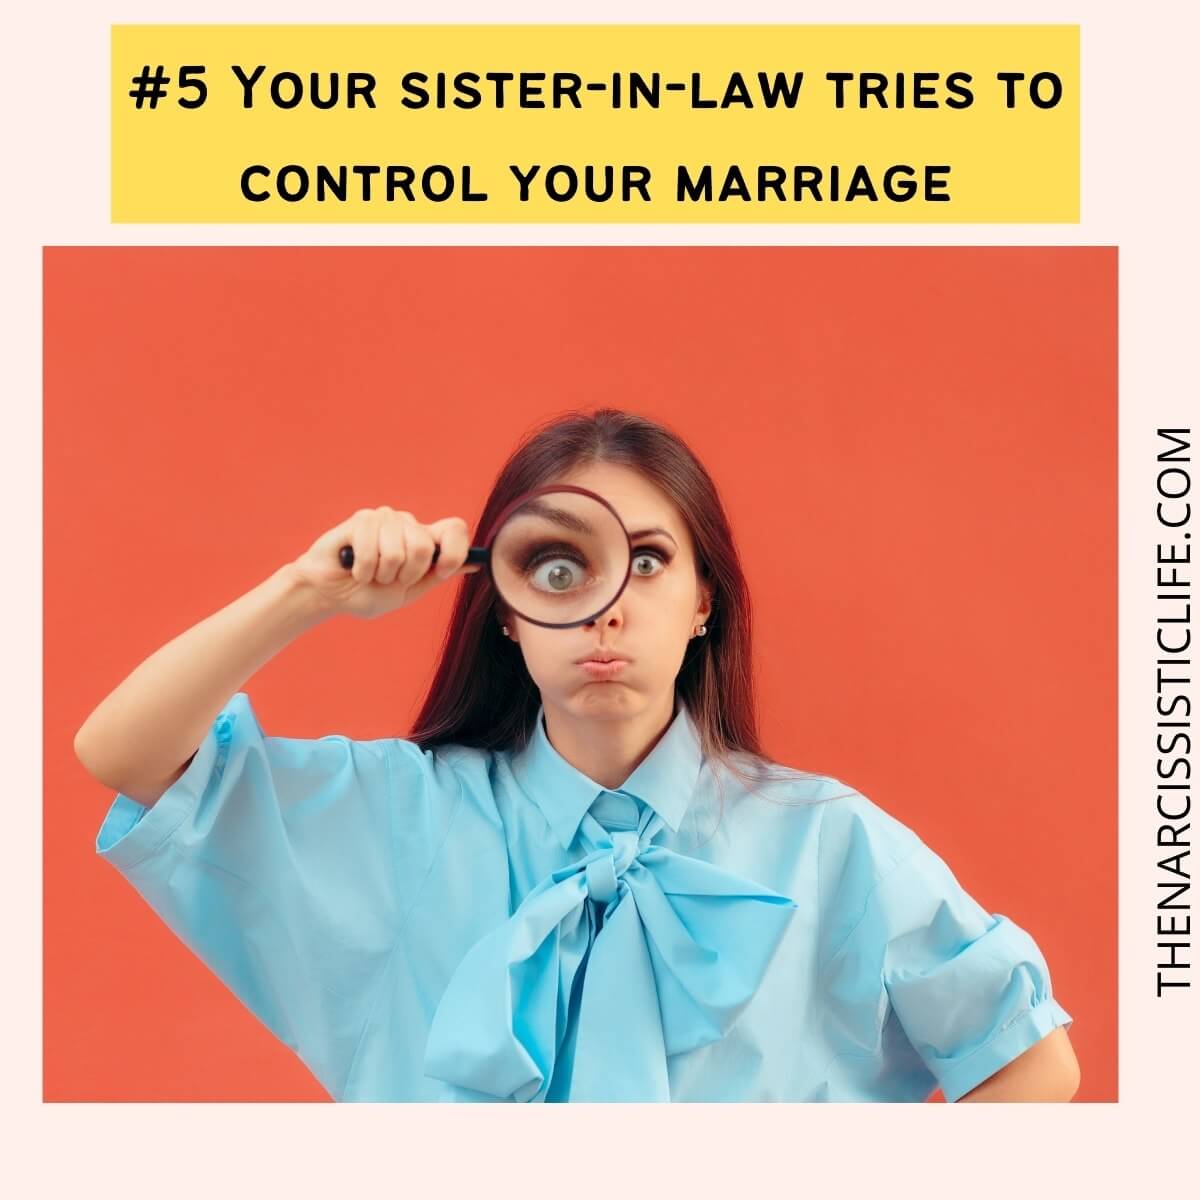 #5 Your sister-in-law tries to control your marriage.